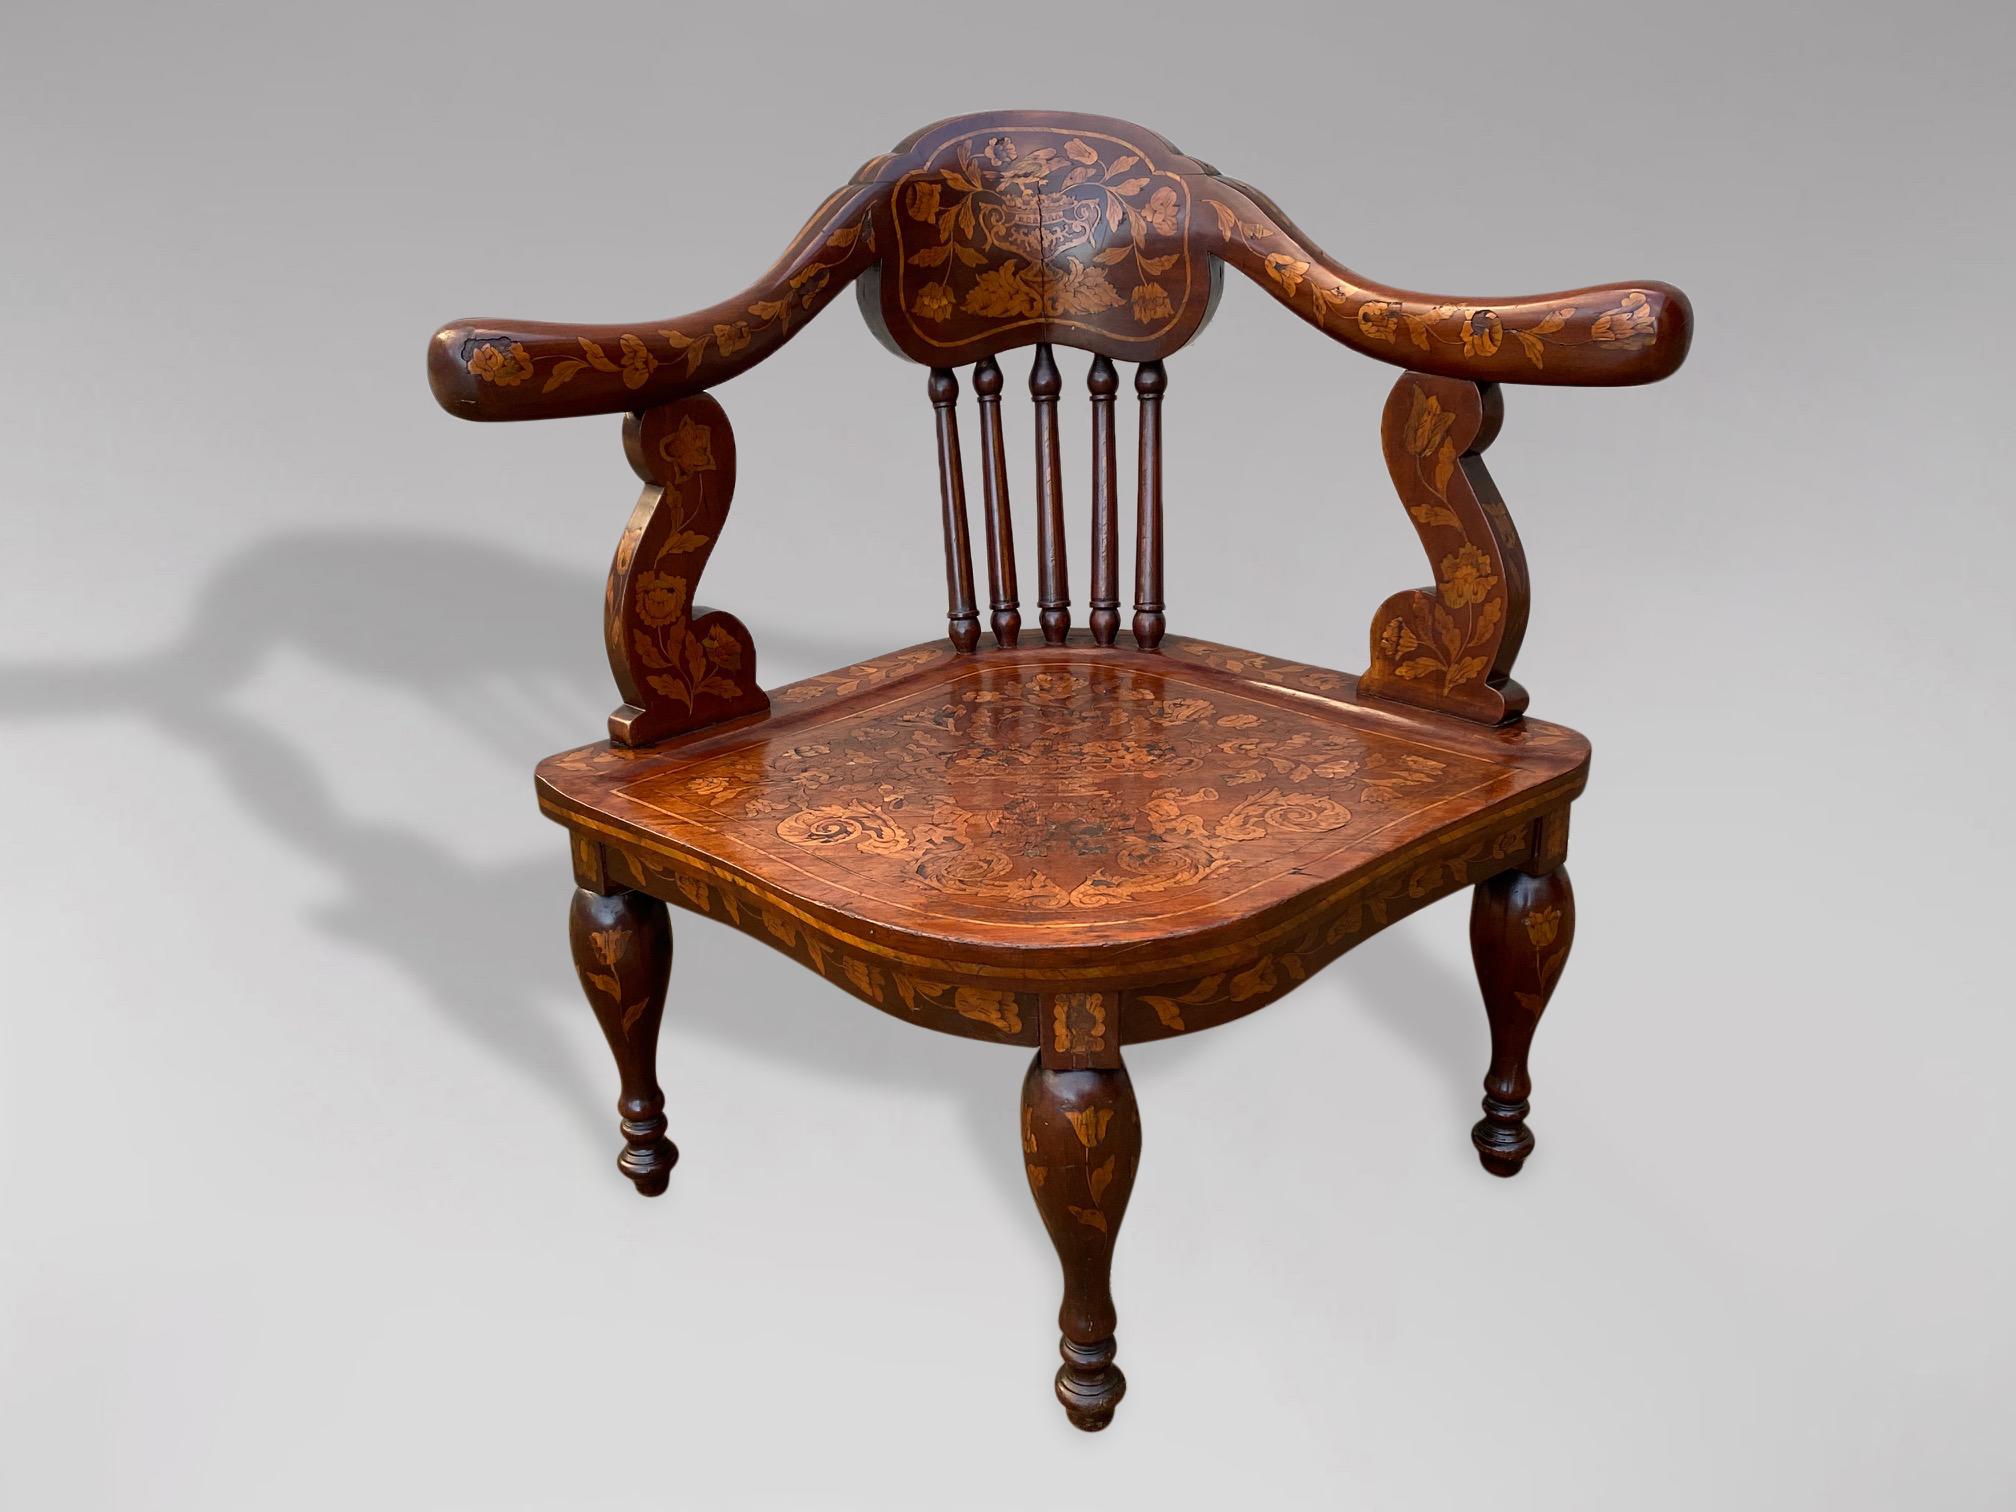 An 18th century, Dutch mahogany and marquetry corner chair. The shaped top rail supported by baluster turned supports, with a lovely elaborate marquetry seat raised on three turned baluster legs and a splayed back leg. This corner chair has been